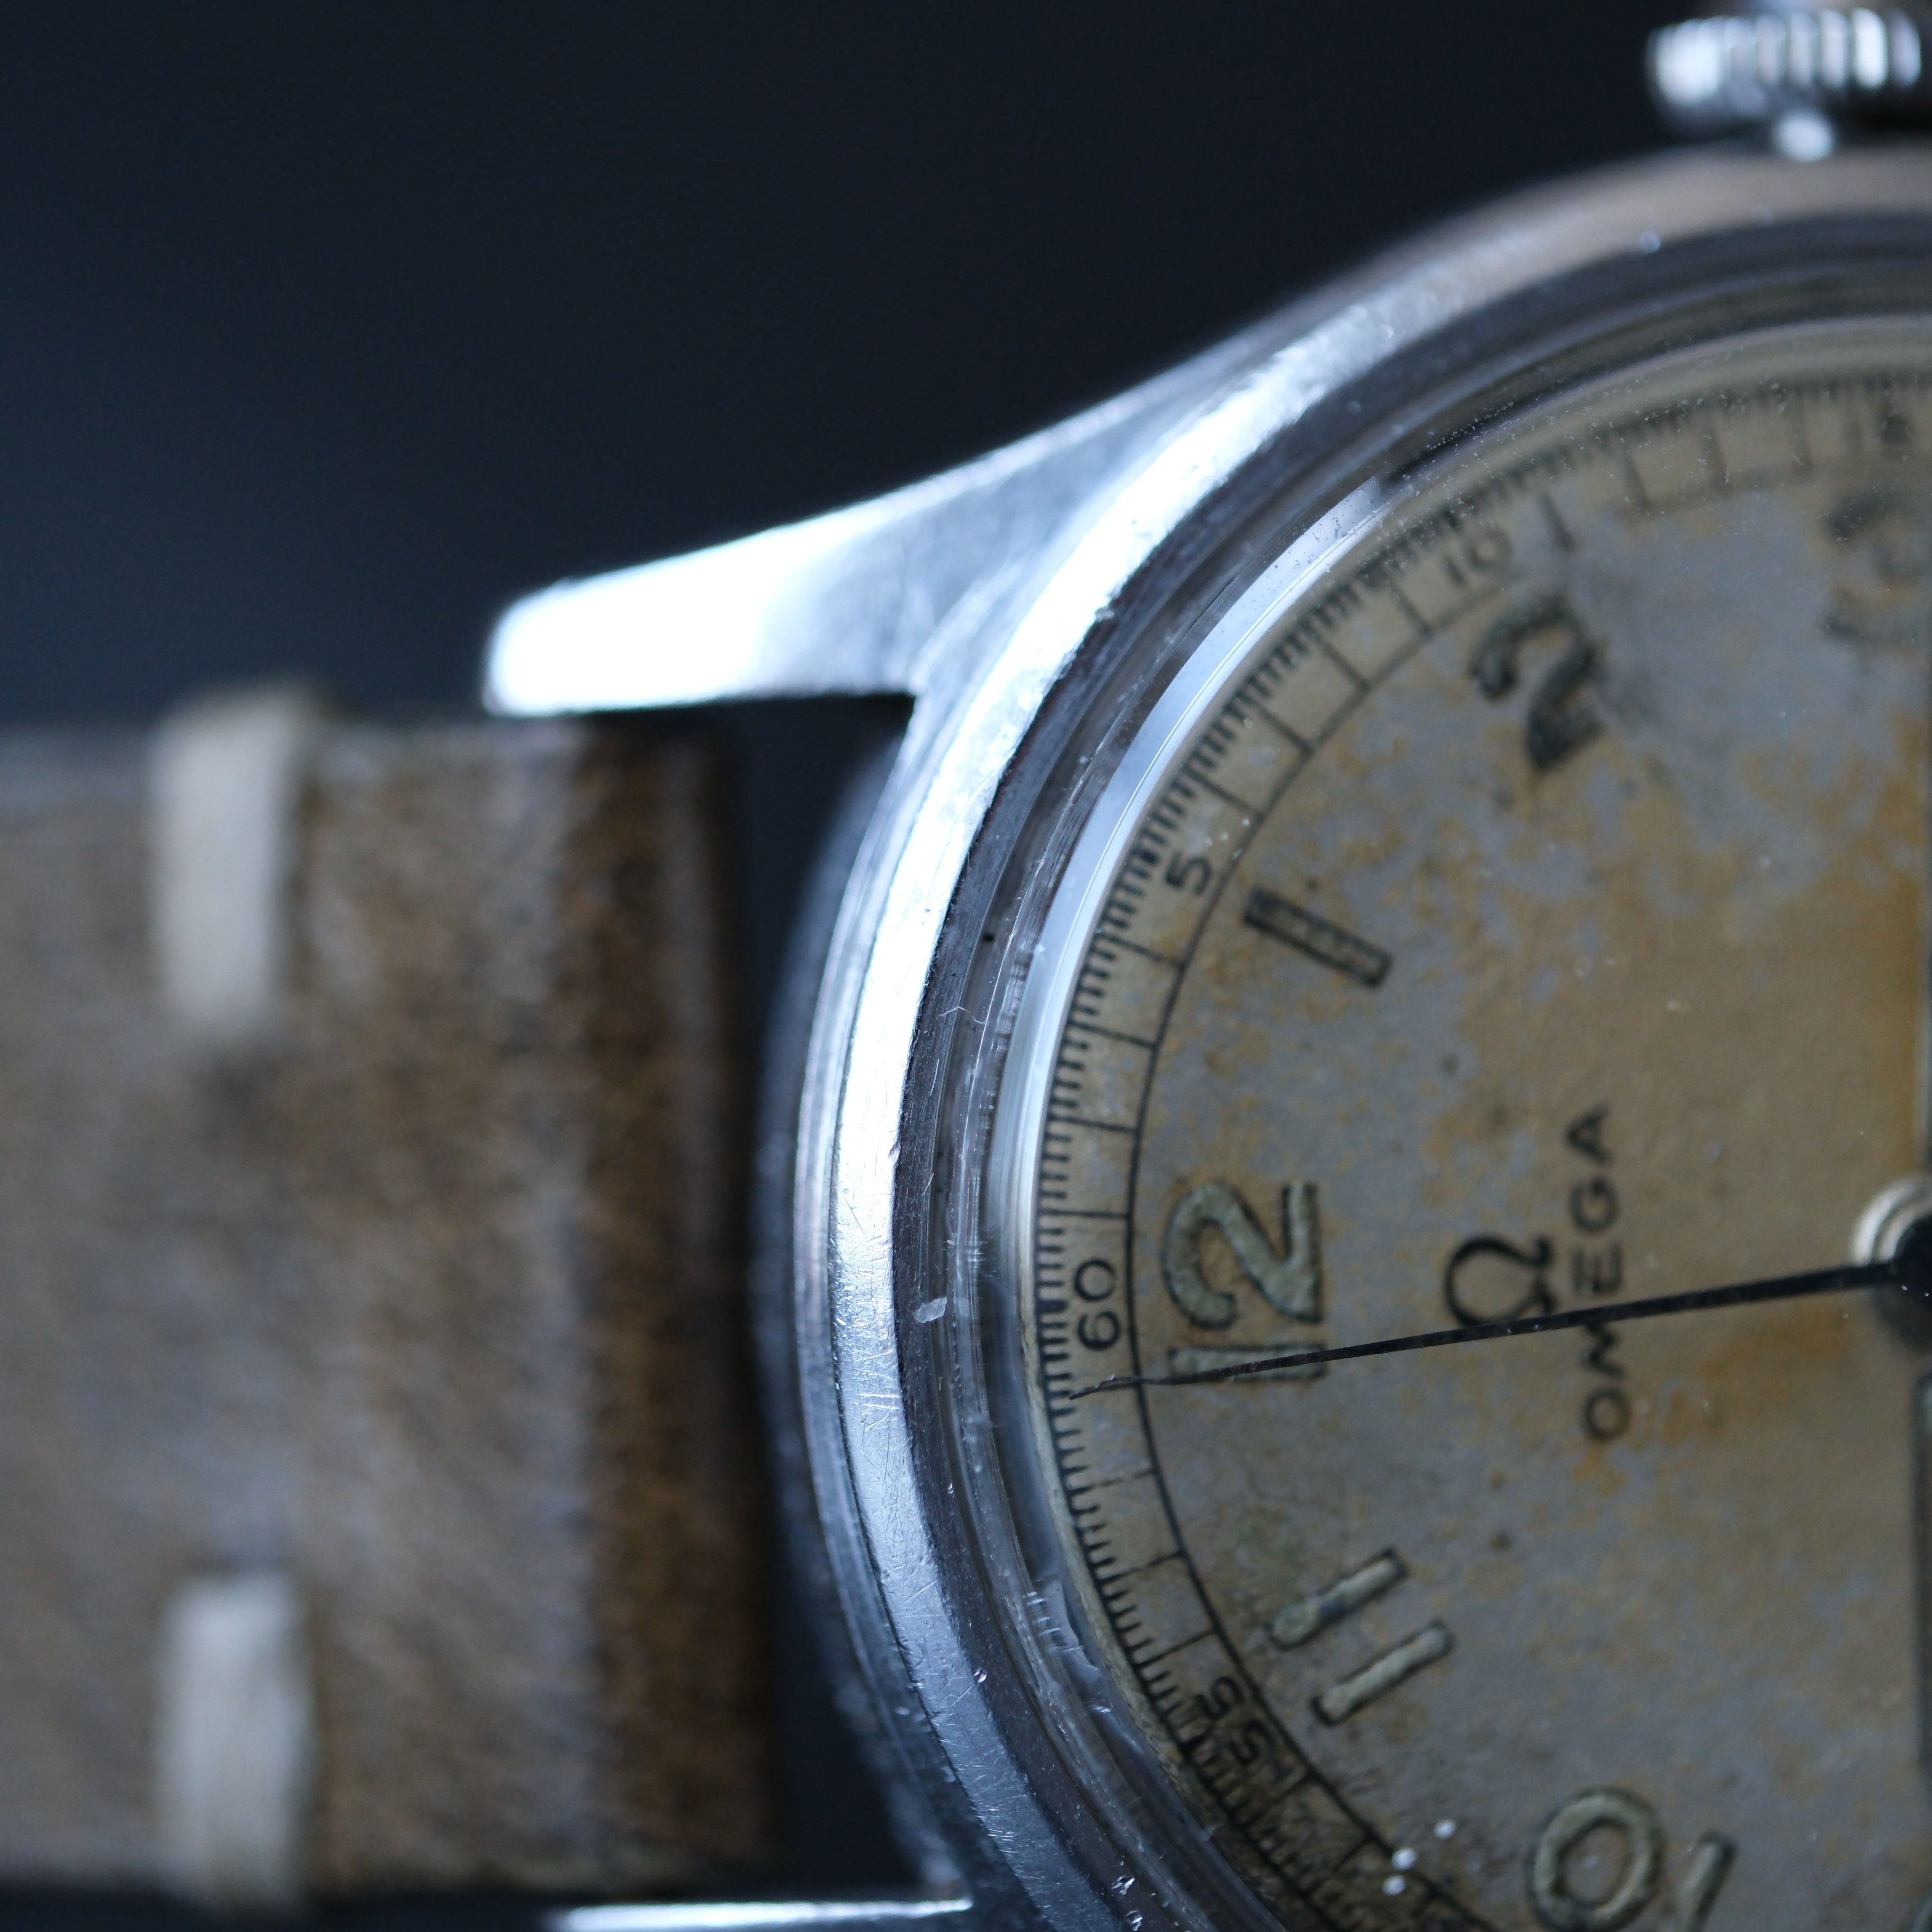 How Mechanical Watches Work: An Insight into Time